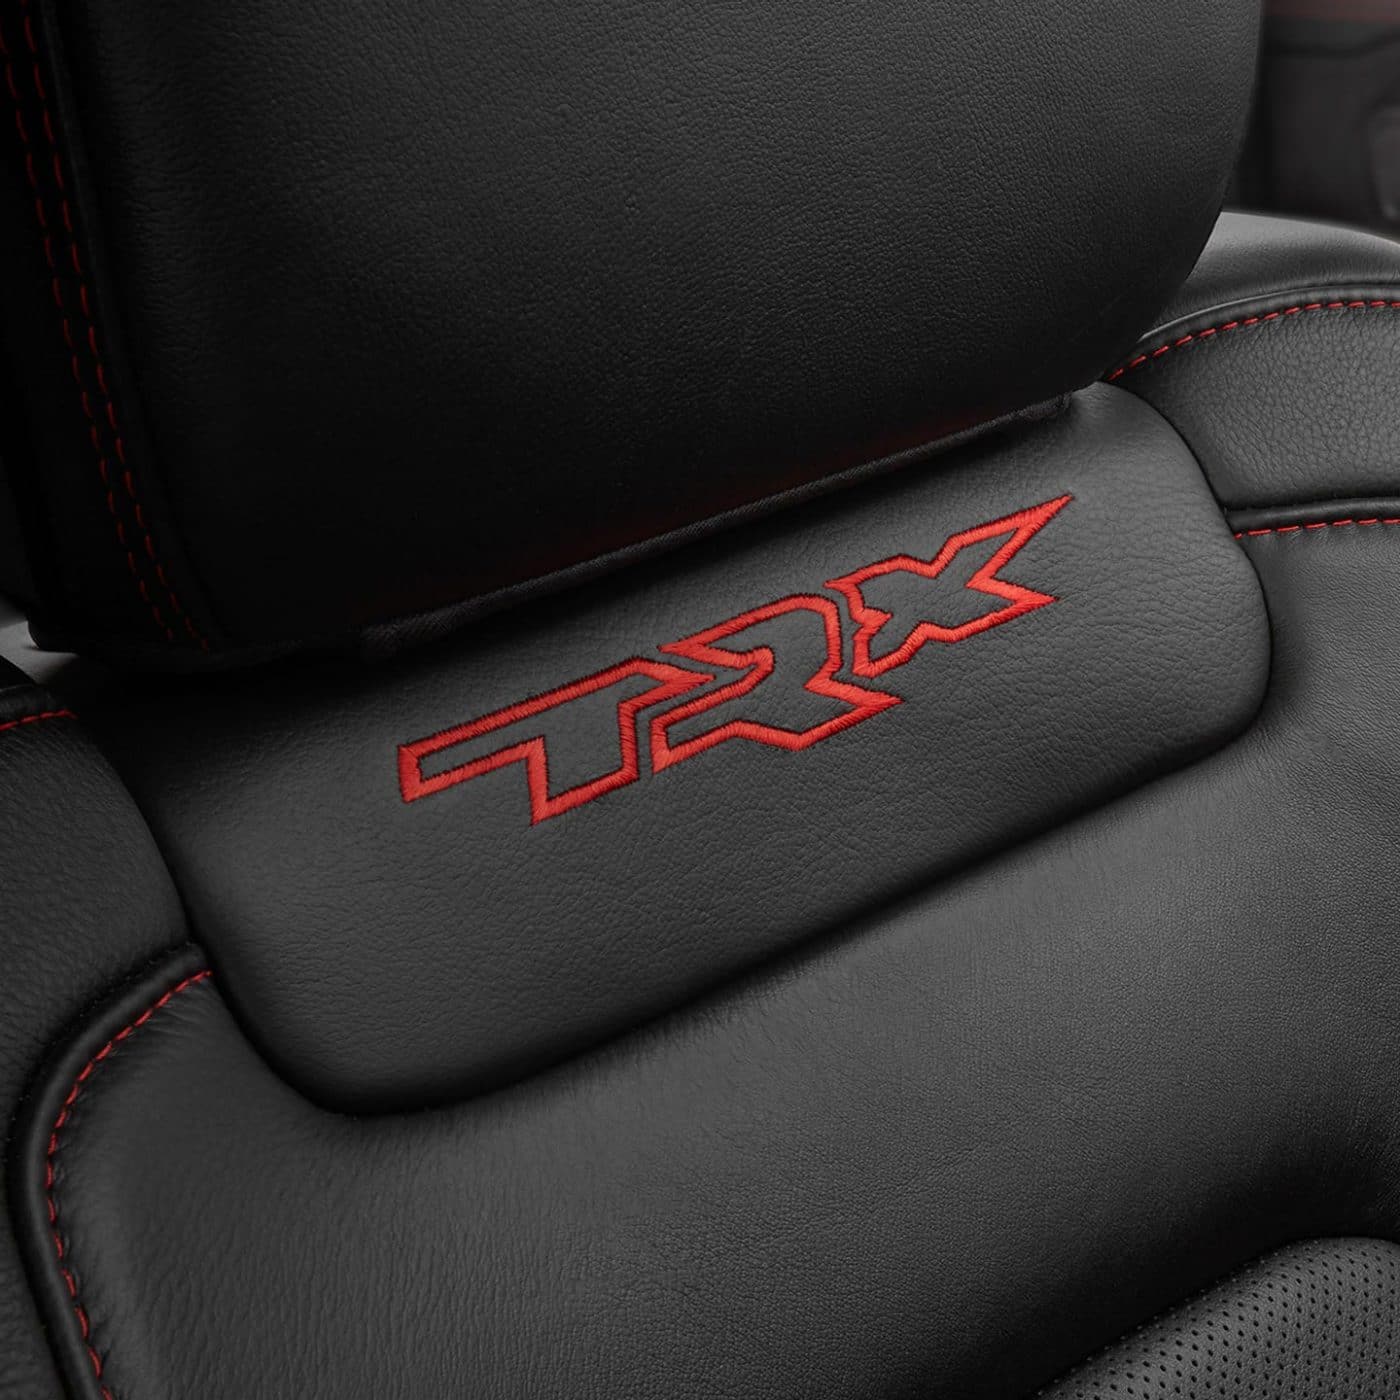 A close-up shot of the embroidered TRX logo on the front passenger seatback in the 2021 Ram 1500 TRX.